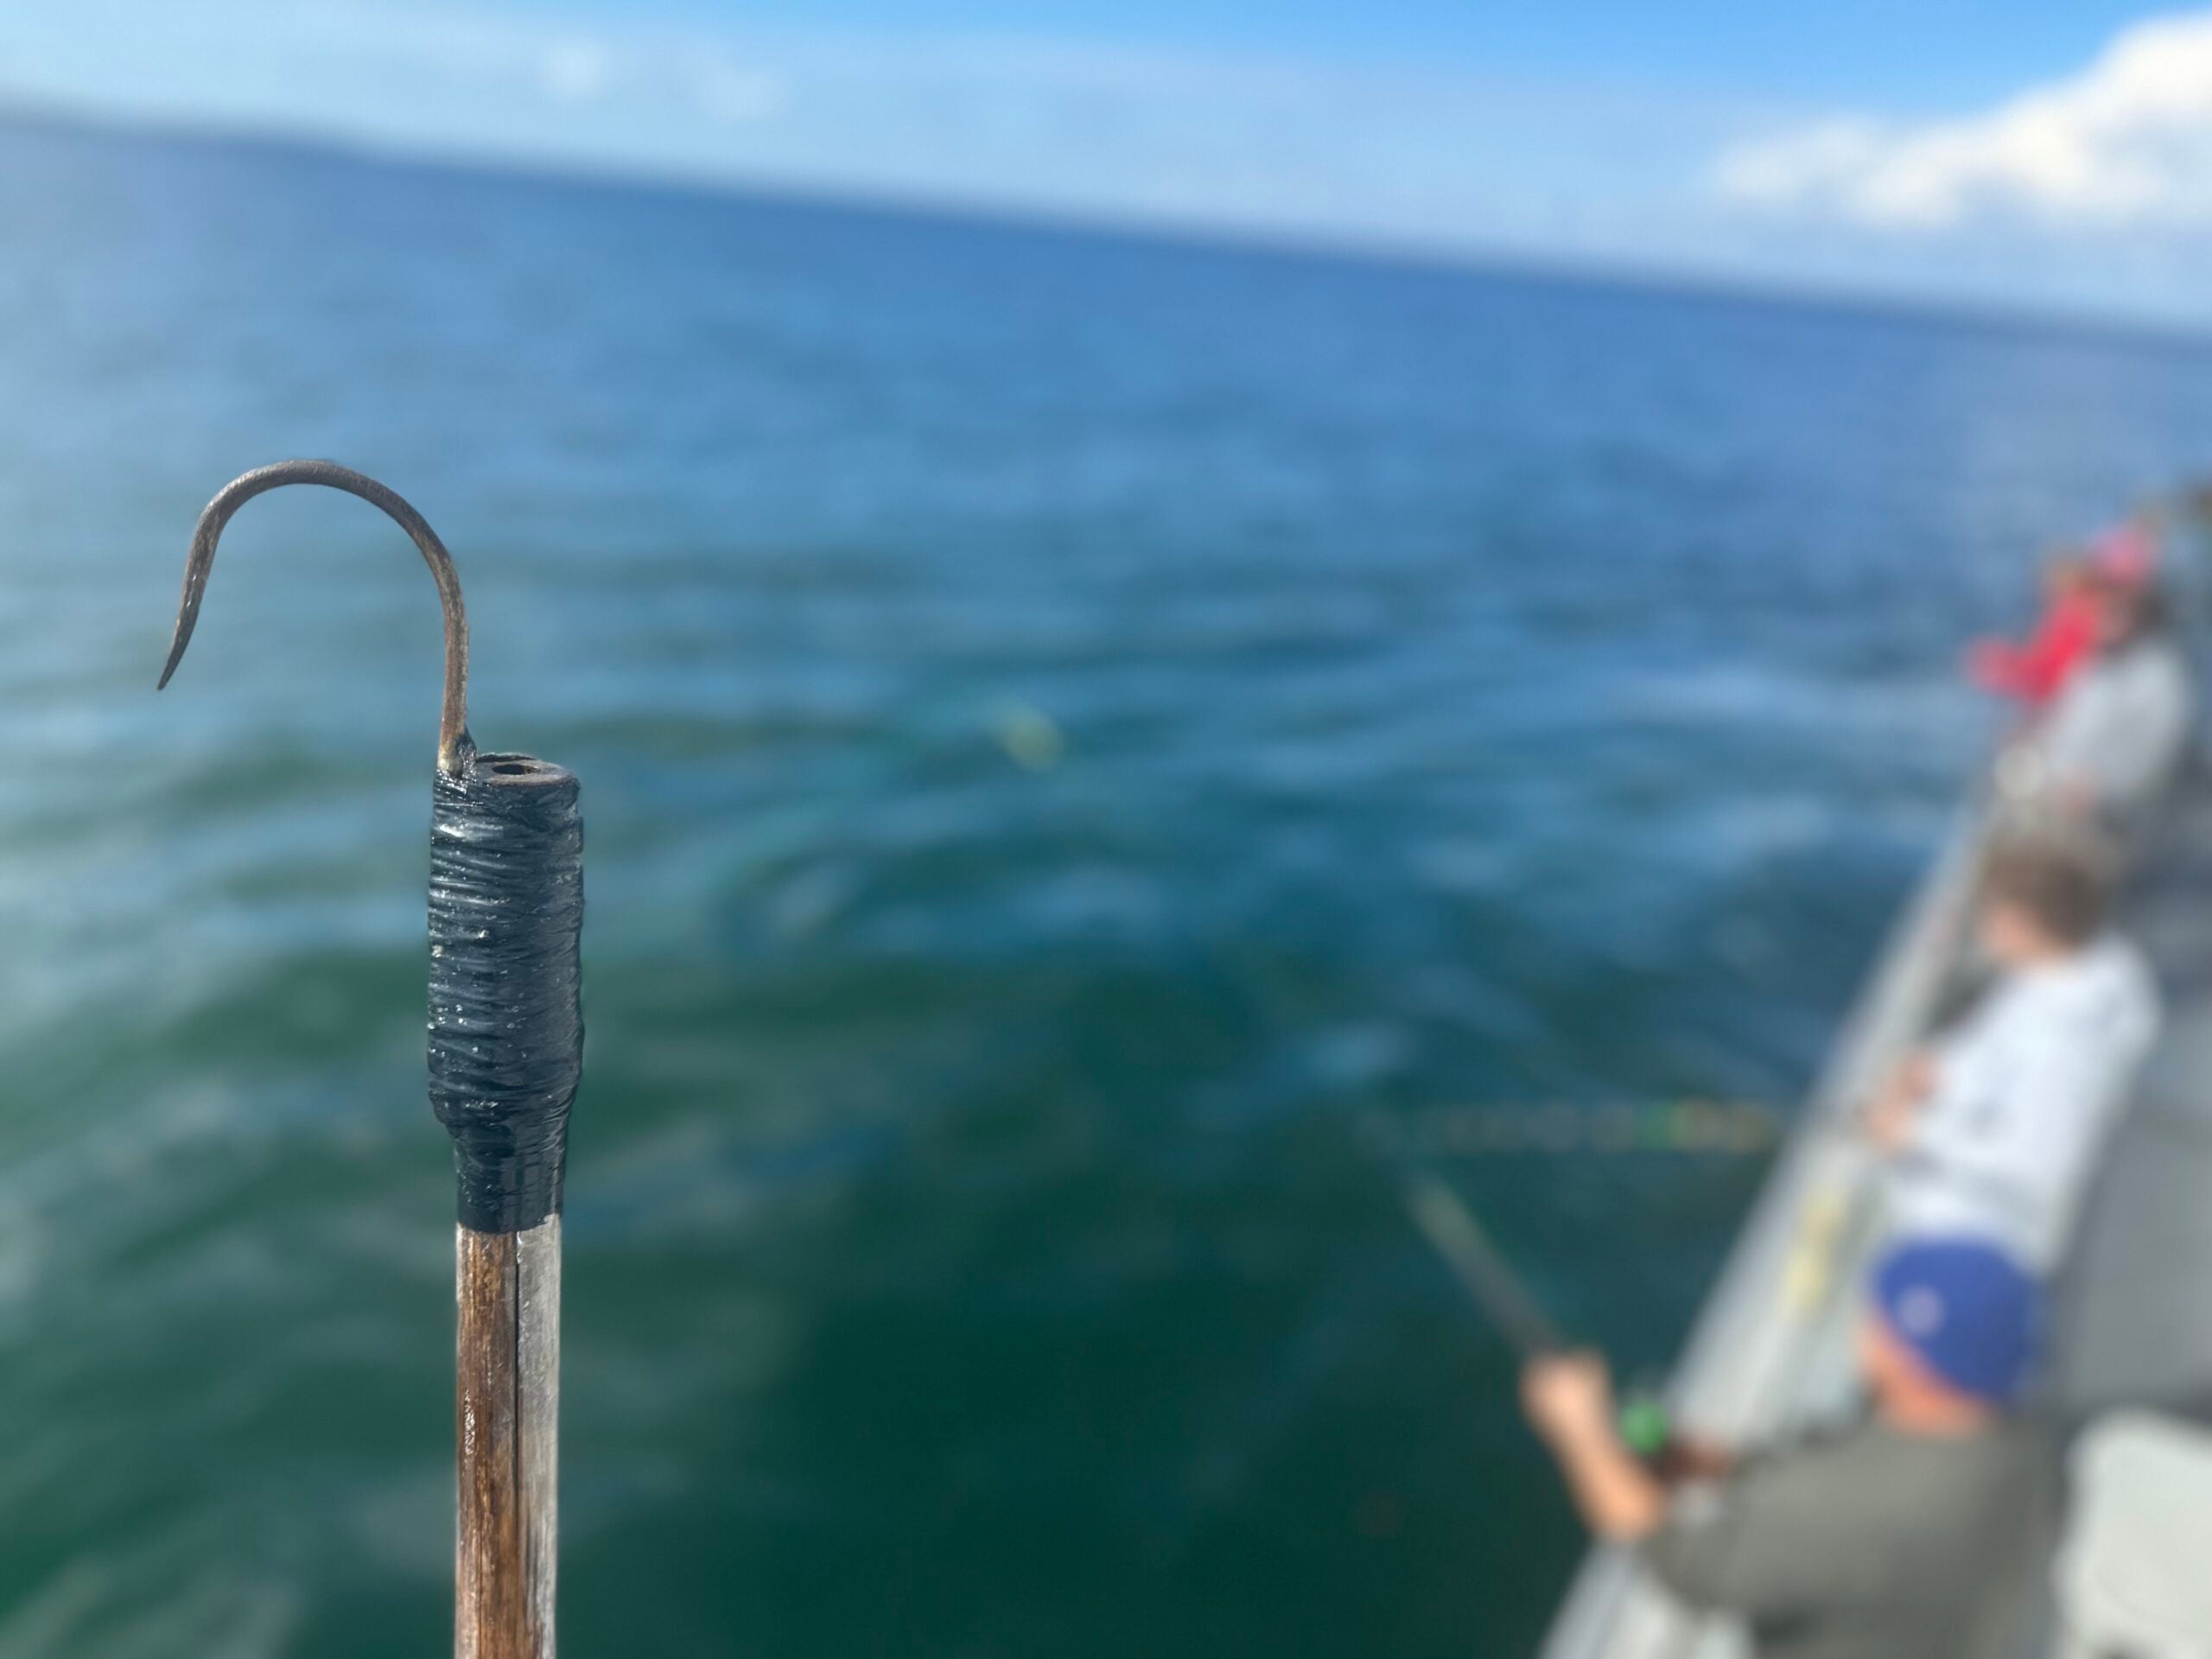 A gaff hook used for hooking fish is shown on a party boat.